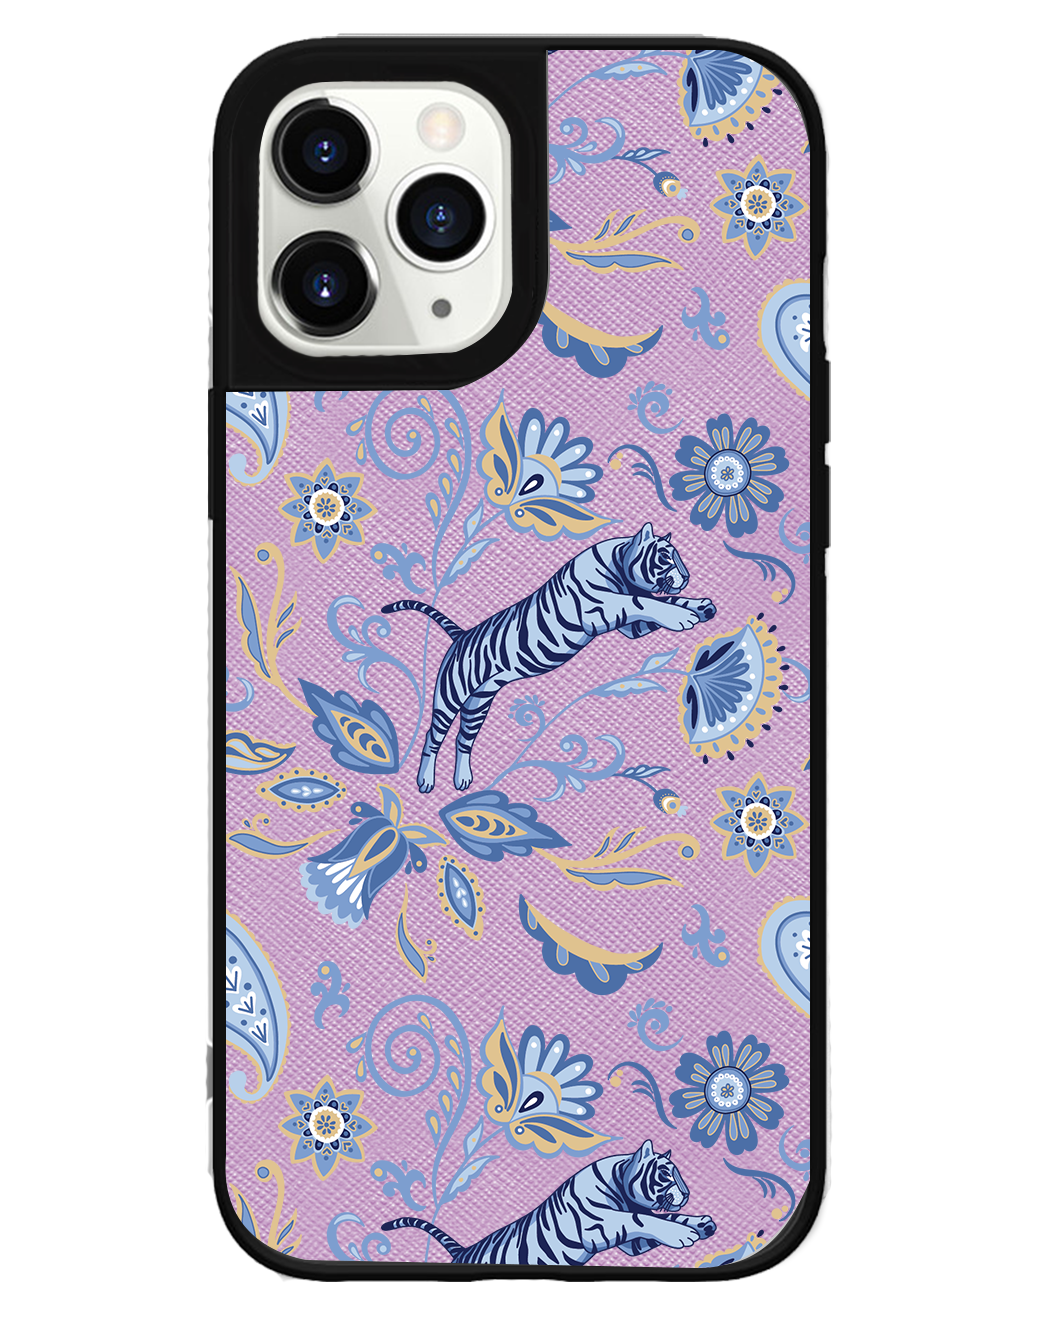 iPhone Leather Grip Case - Tiger & Floral 1.0